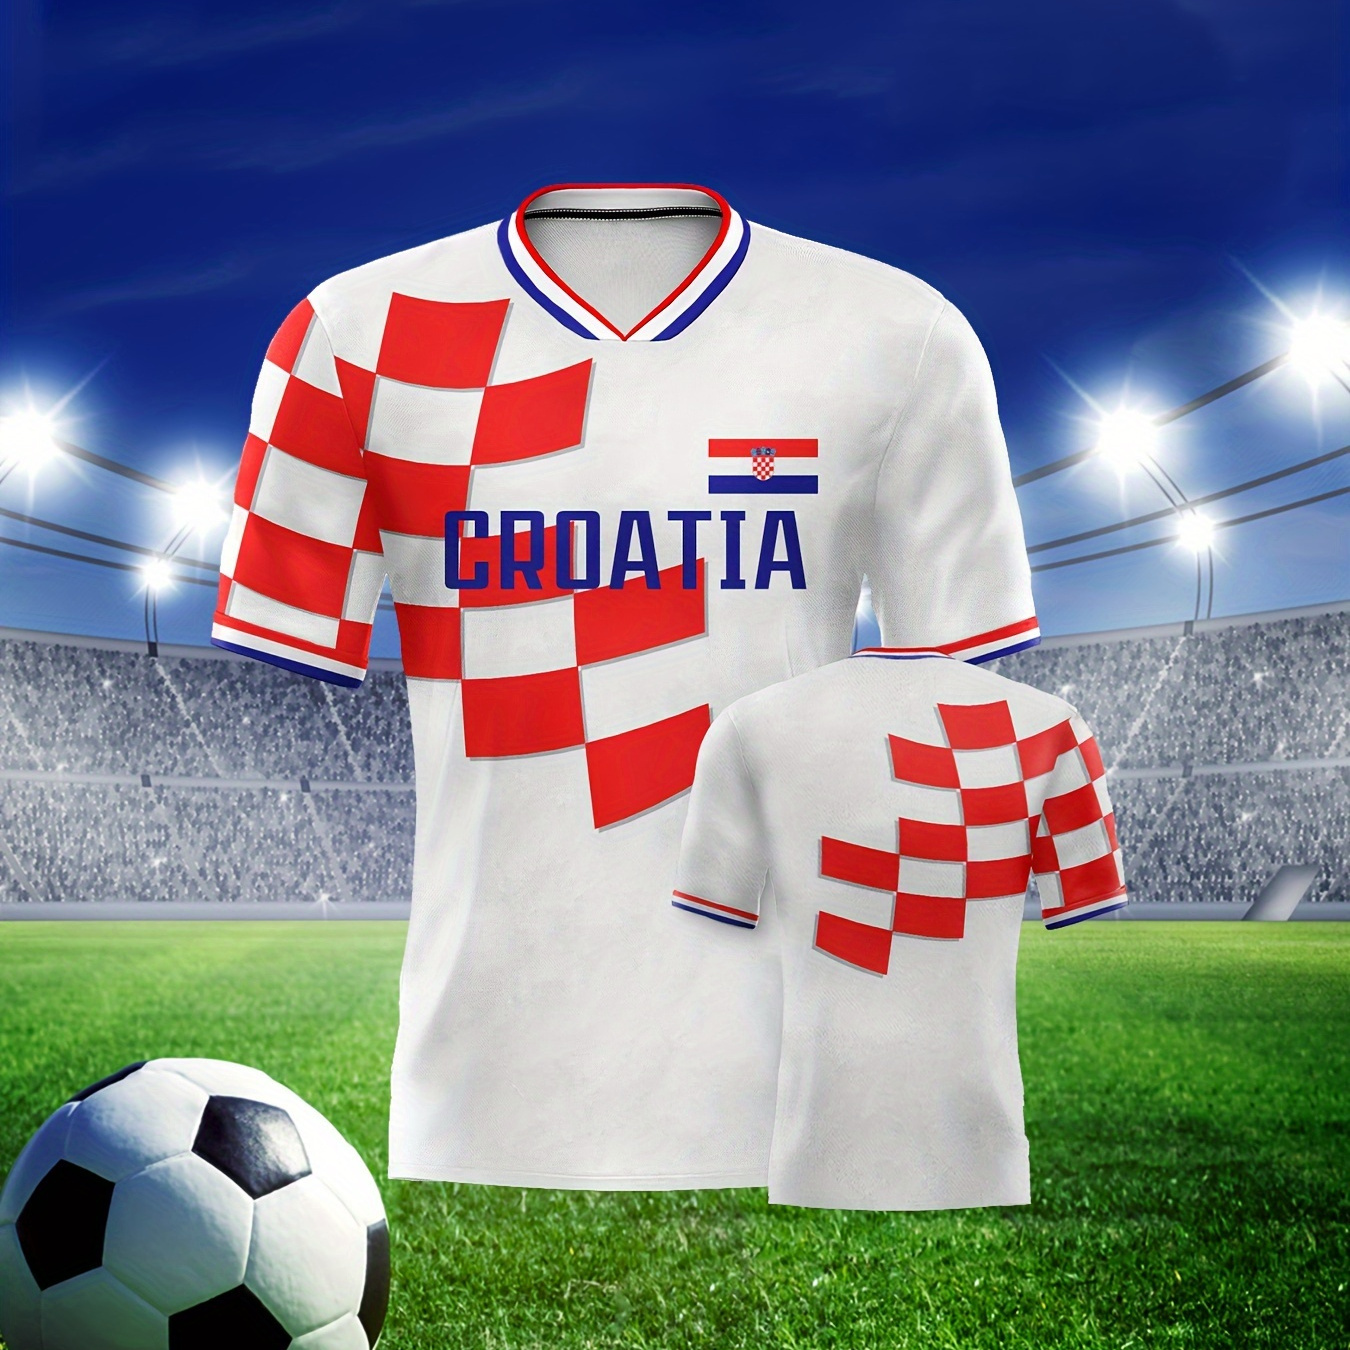 

Men's Squares & Croatia Graphic Print Football Jersey T-shirt For Competition Party Training